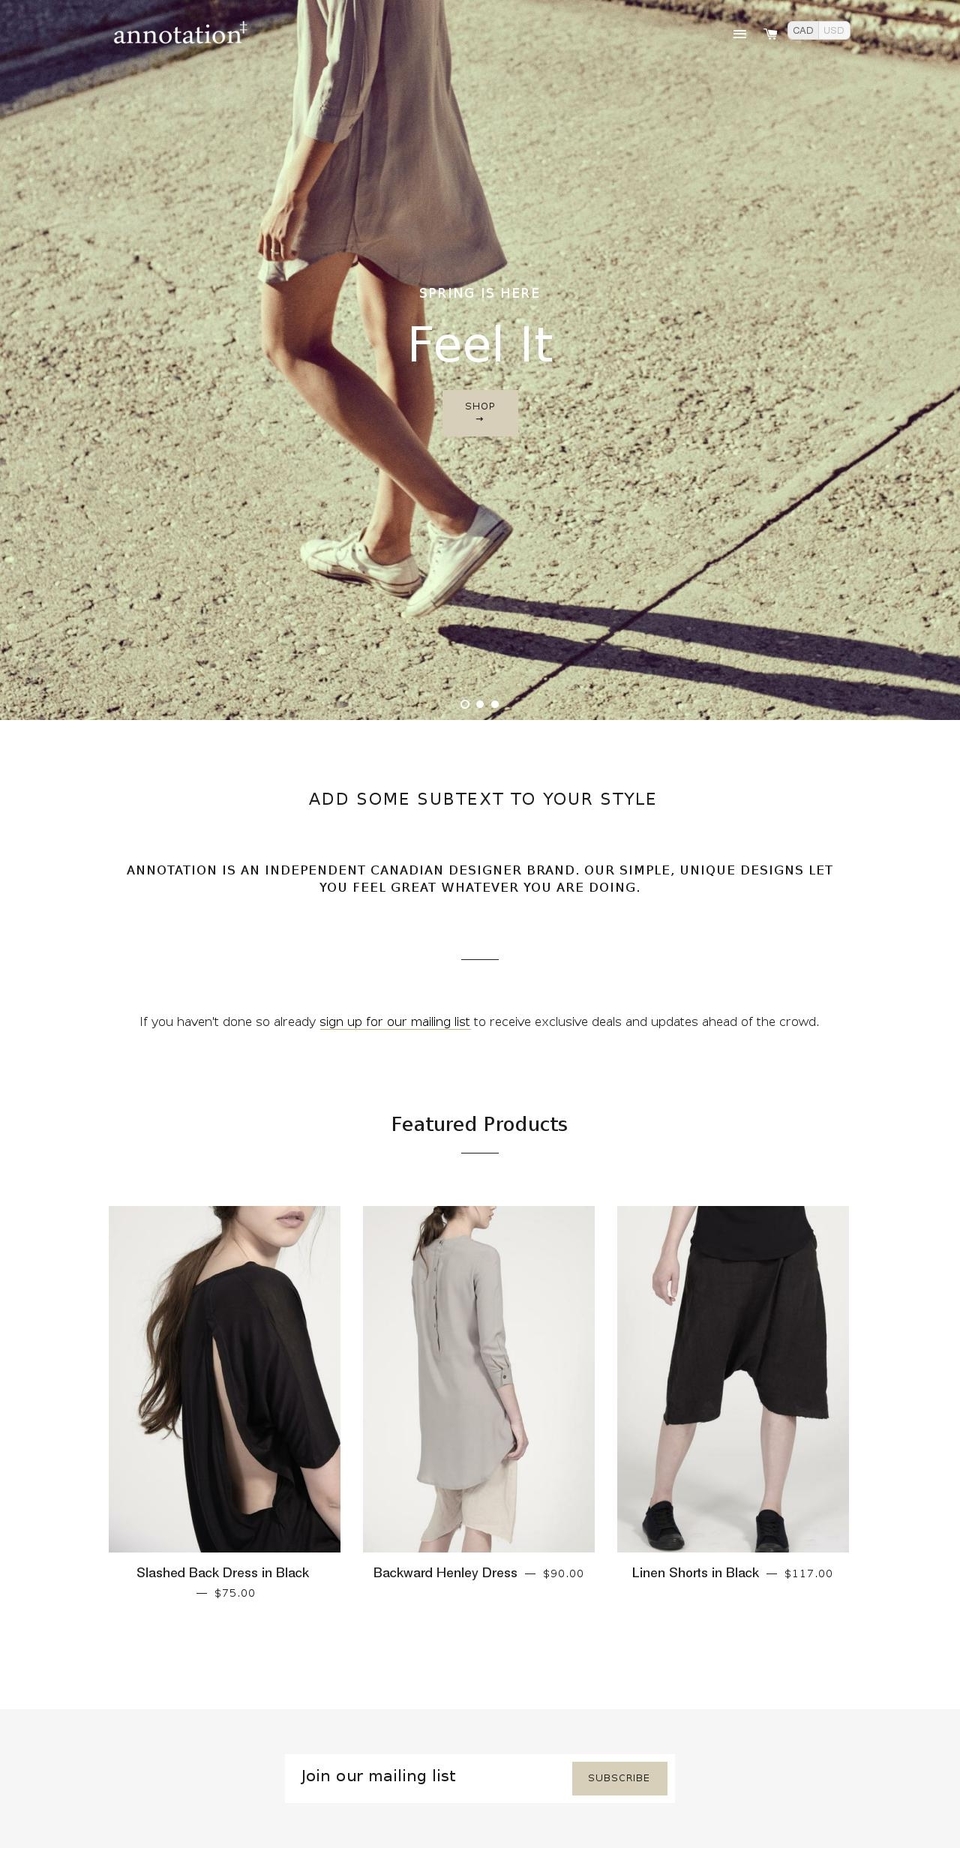 Brooklyn Shopify theme site example annotationclothing.com